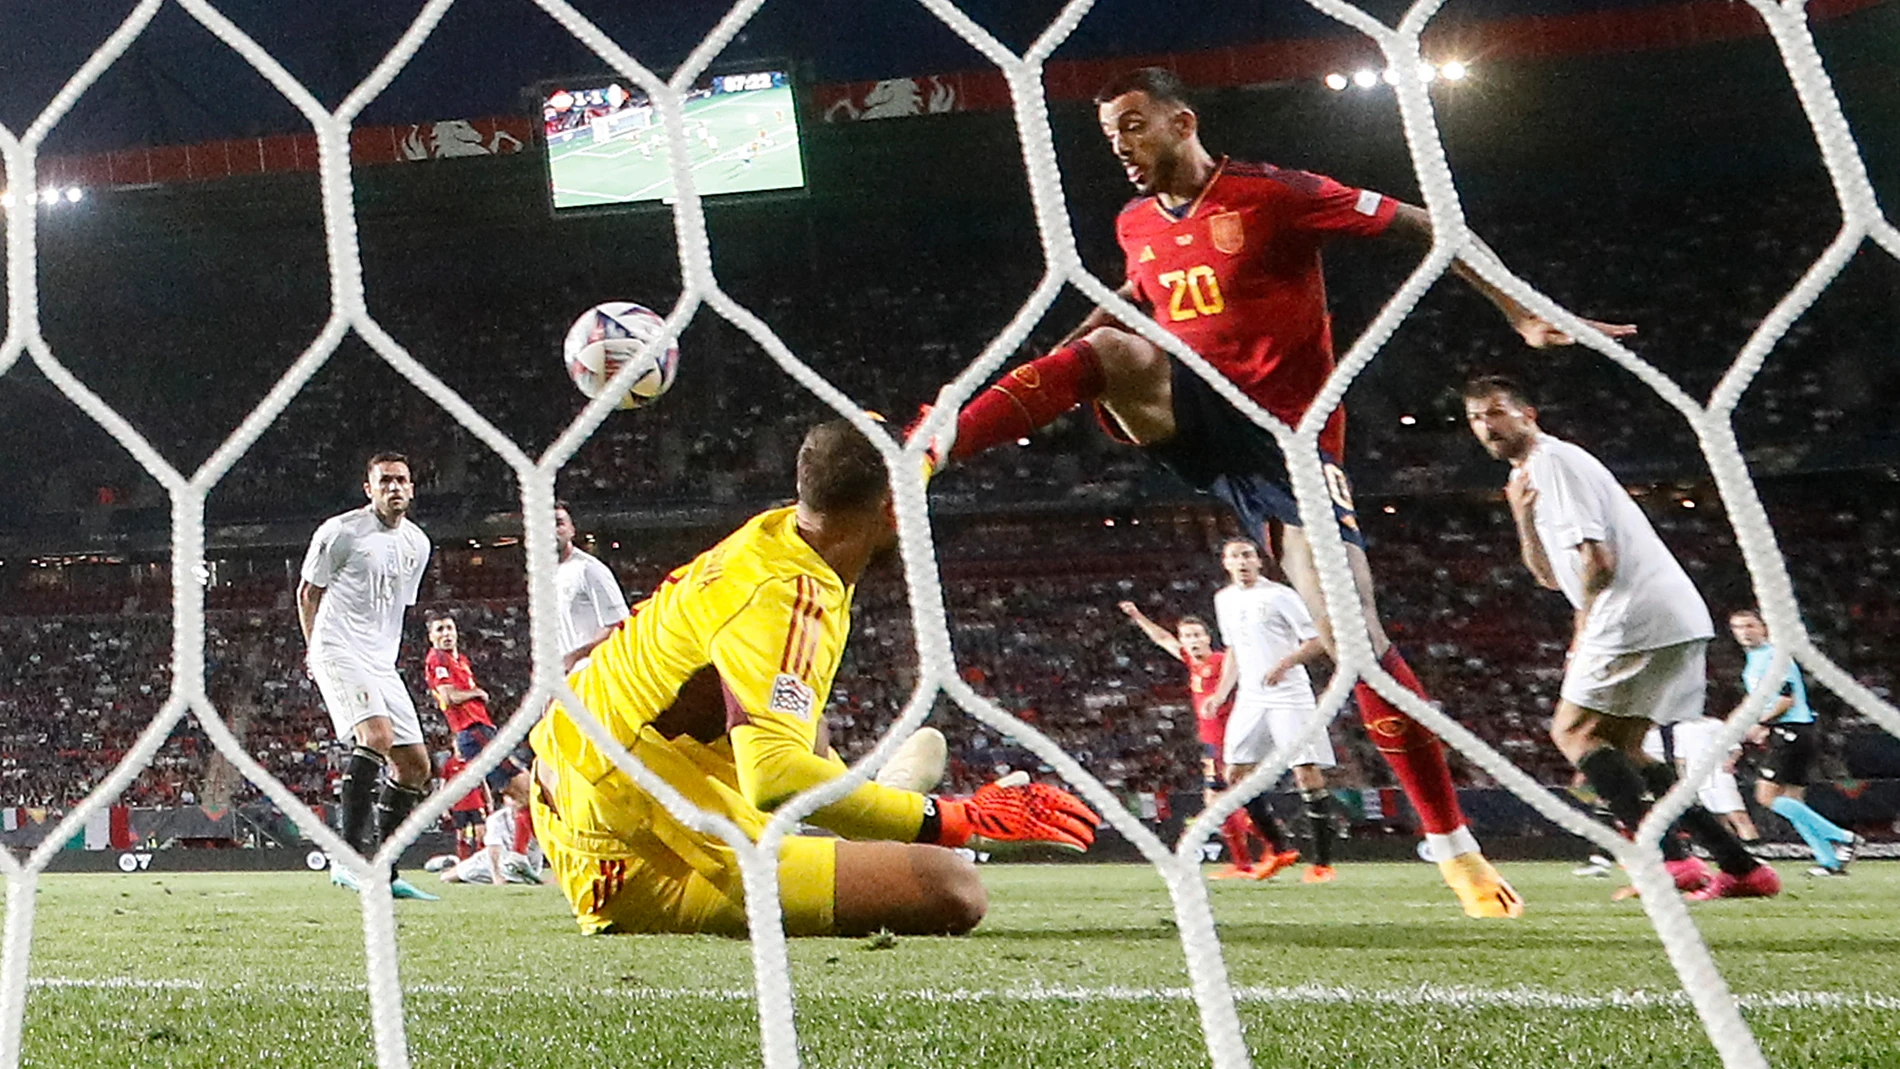 Spain's Joselu scores the decisive last goal against Italy goalkeeper Gianluigi Donnarumma during the Nations League semifinal soccer match between Spain and Italy in Enschede, Netherlands, Thursday June 15, 2023. (AP Photo/Martin Meissner